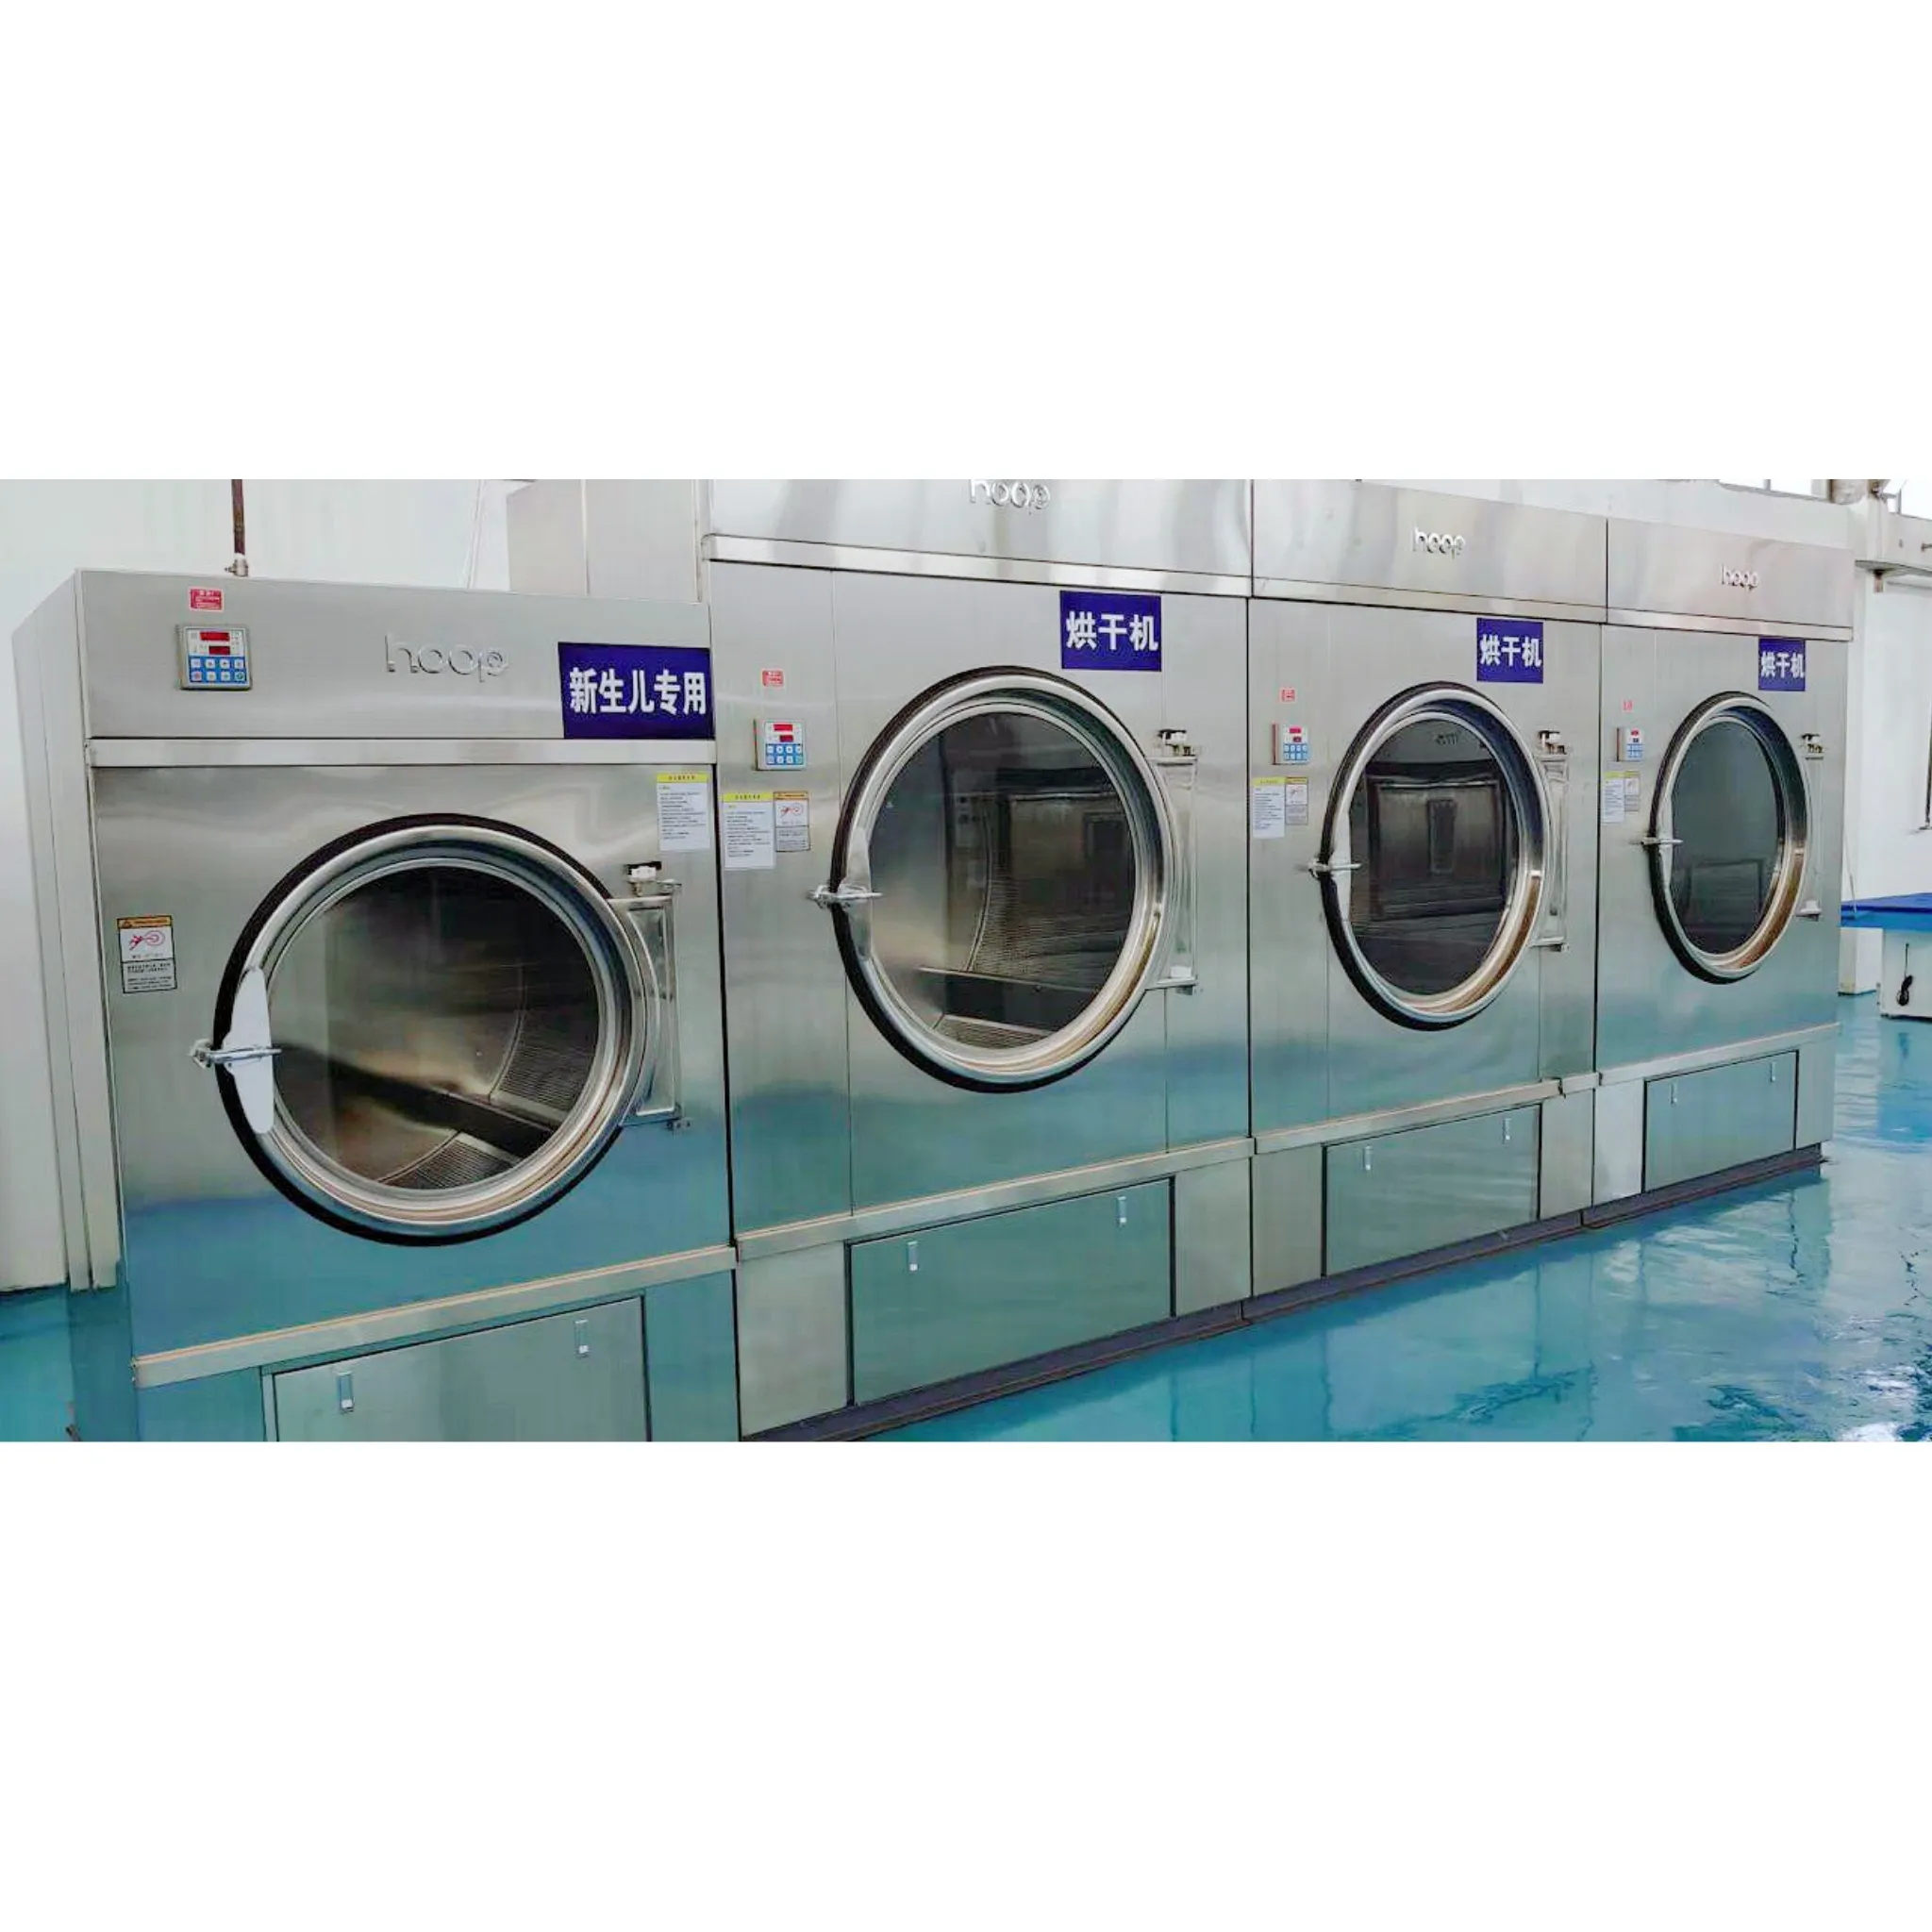 50kg tumble dryer washing machine/ commercial laundry equipment /dry cleaning machine